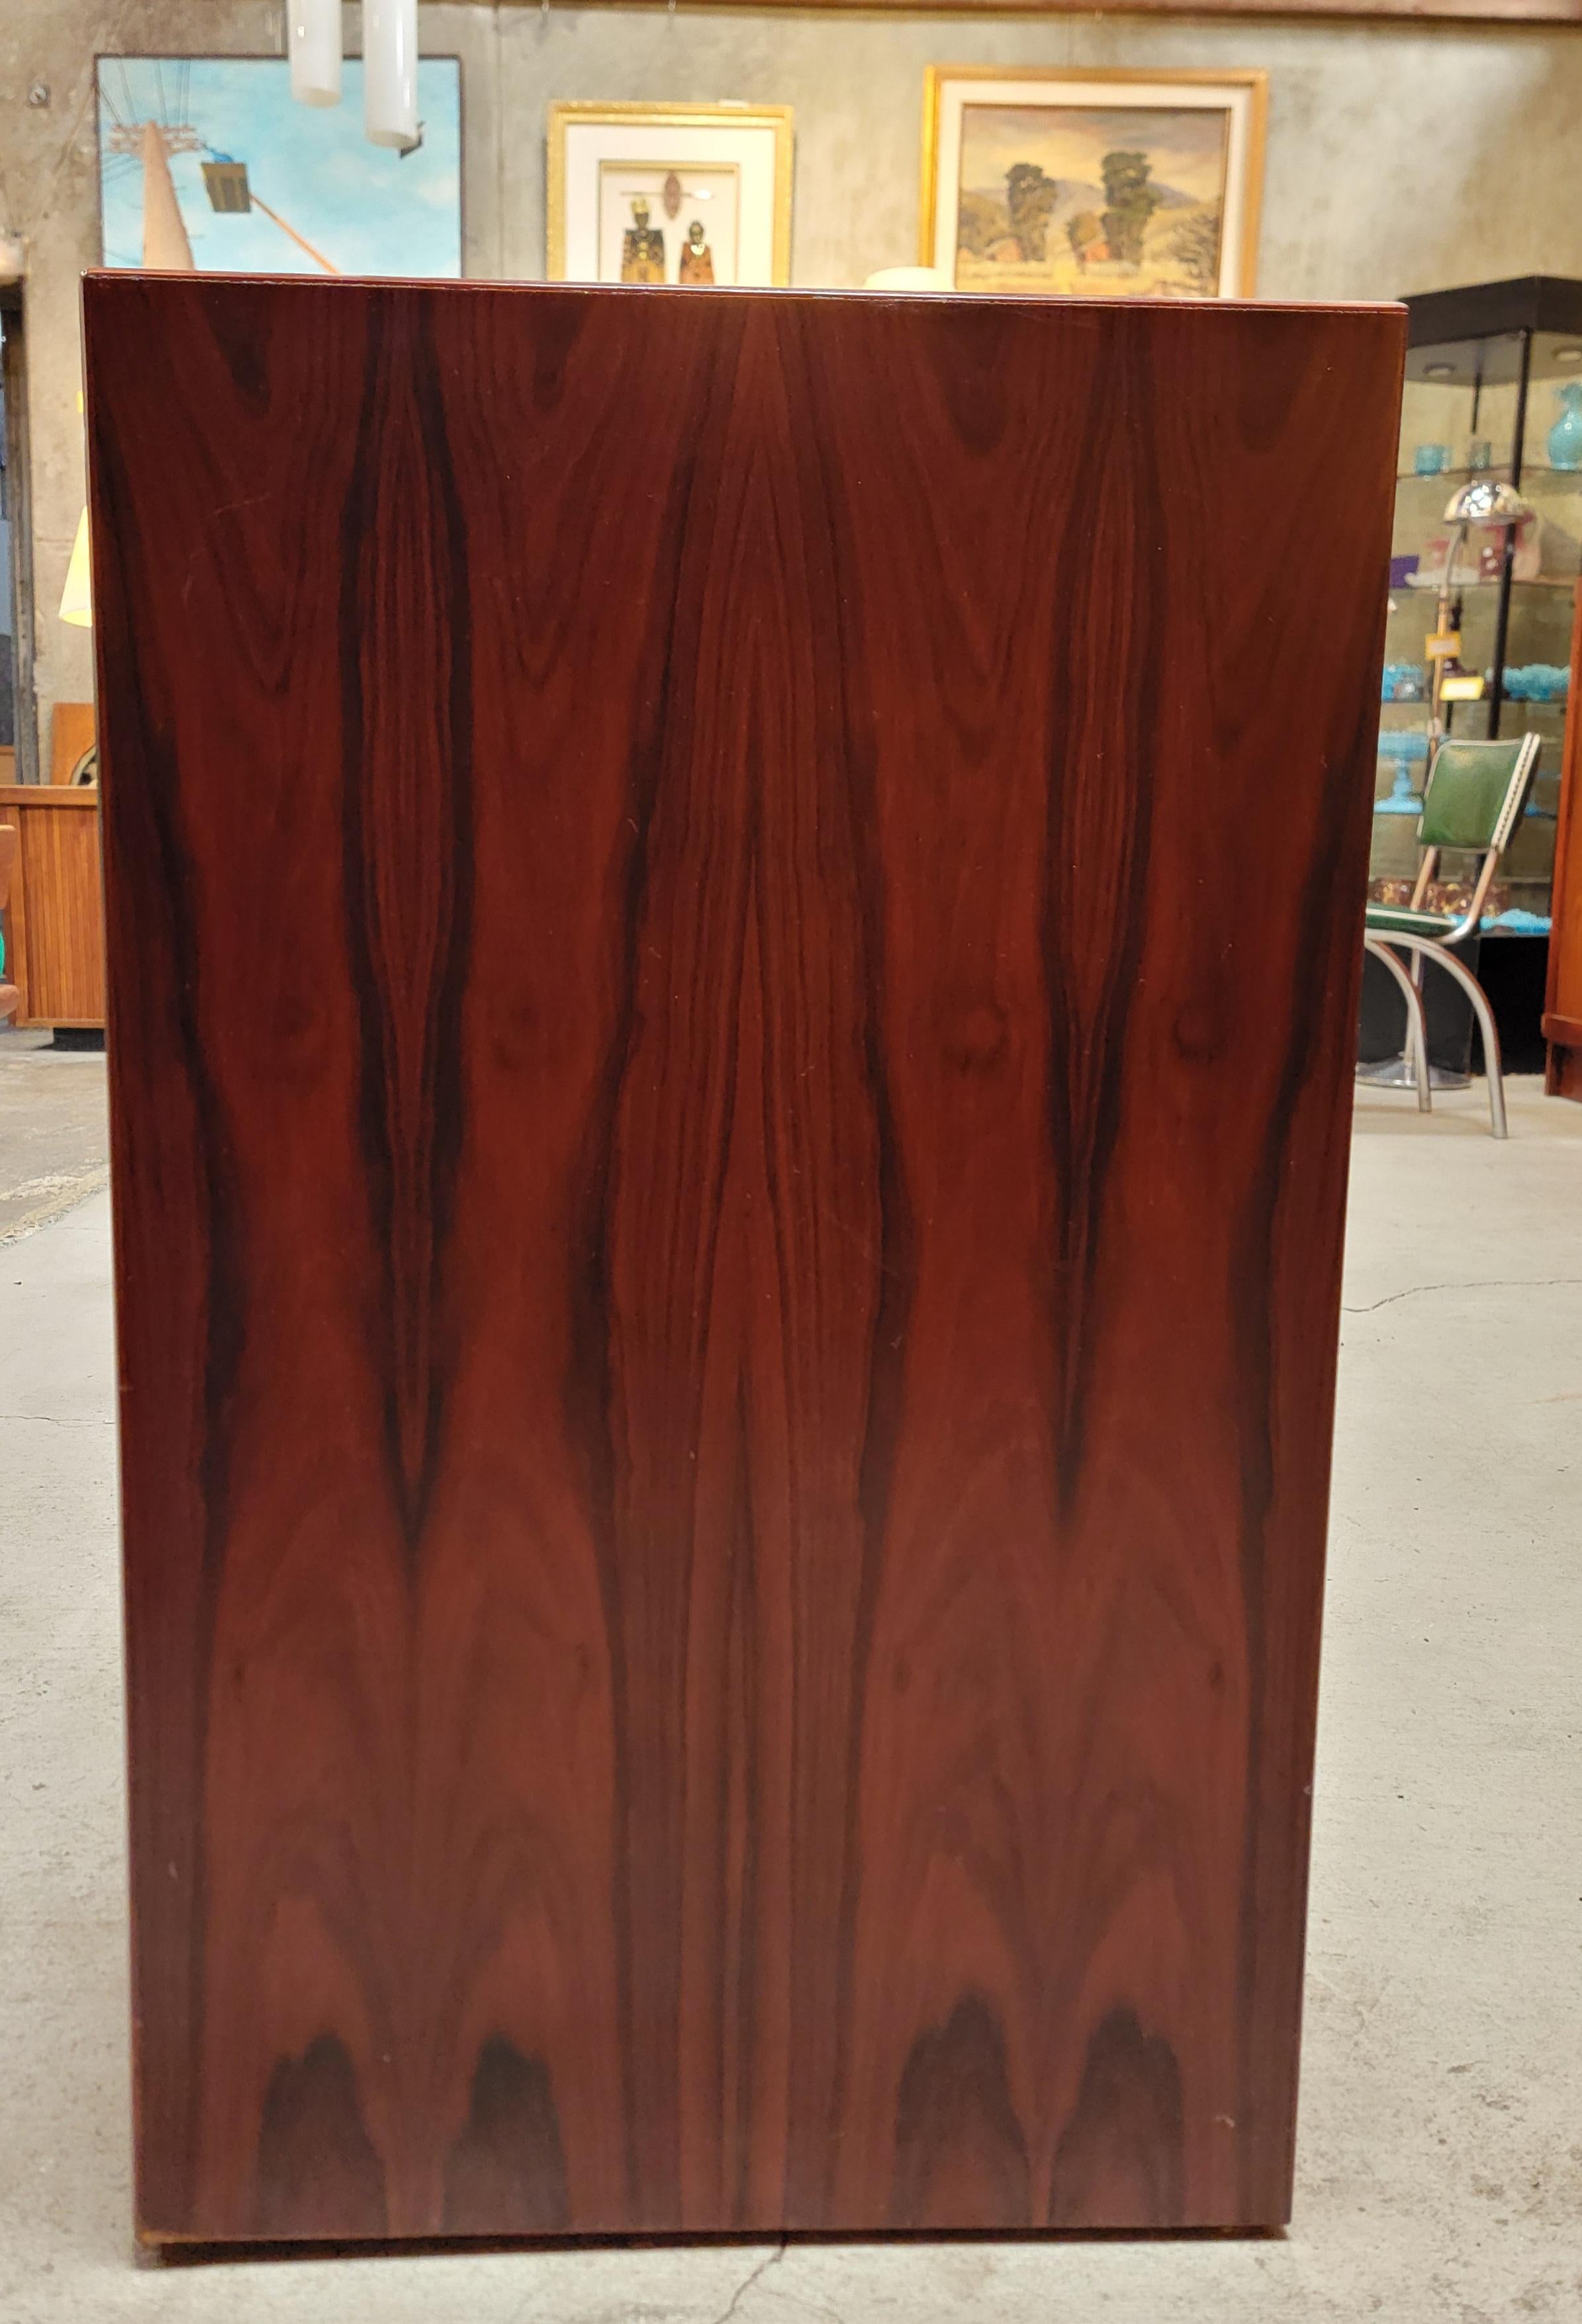 Danish Rosewood Credenza with Sliding Doors In Good Condition For Sale In Fulton, CA